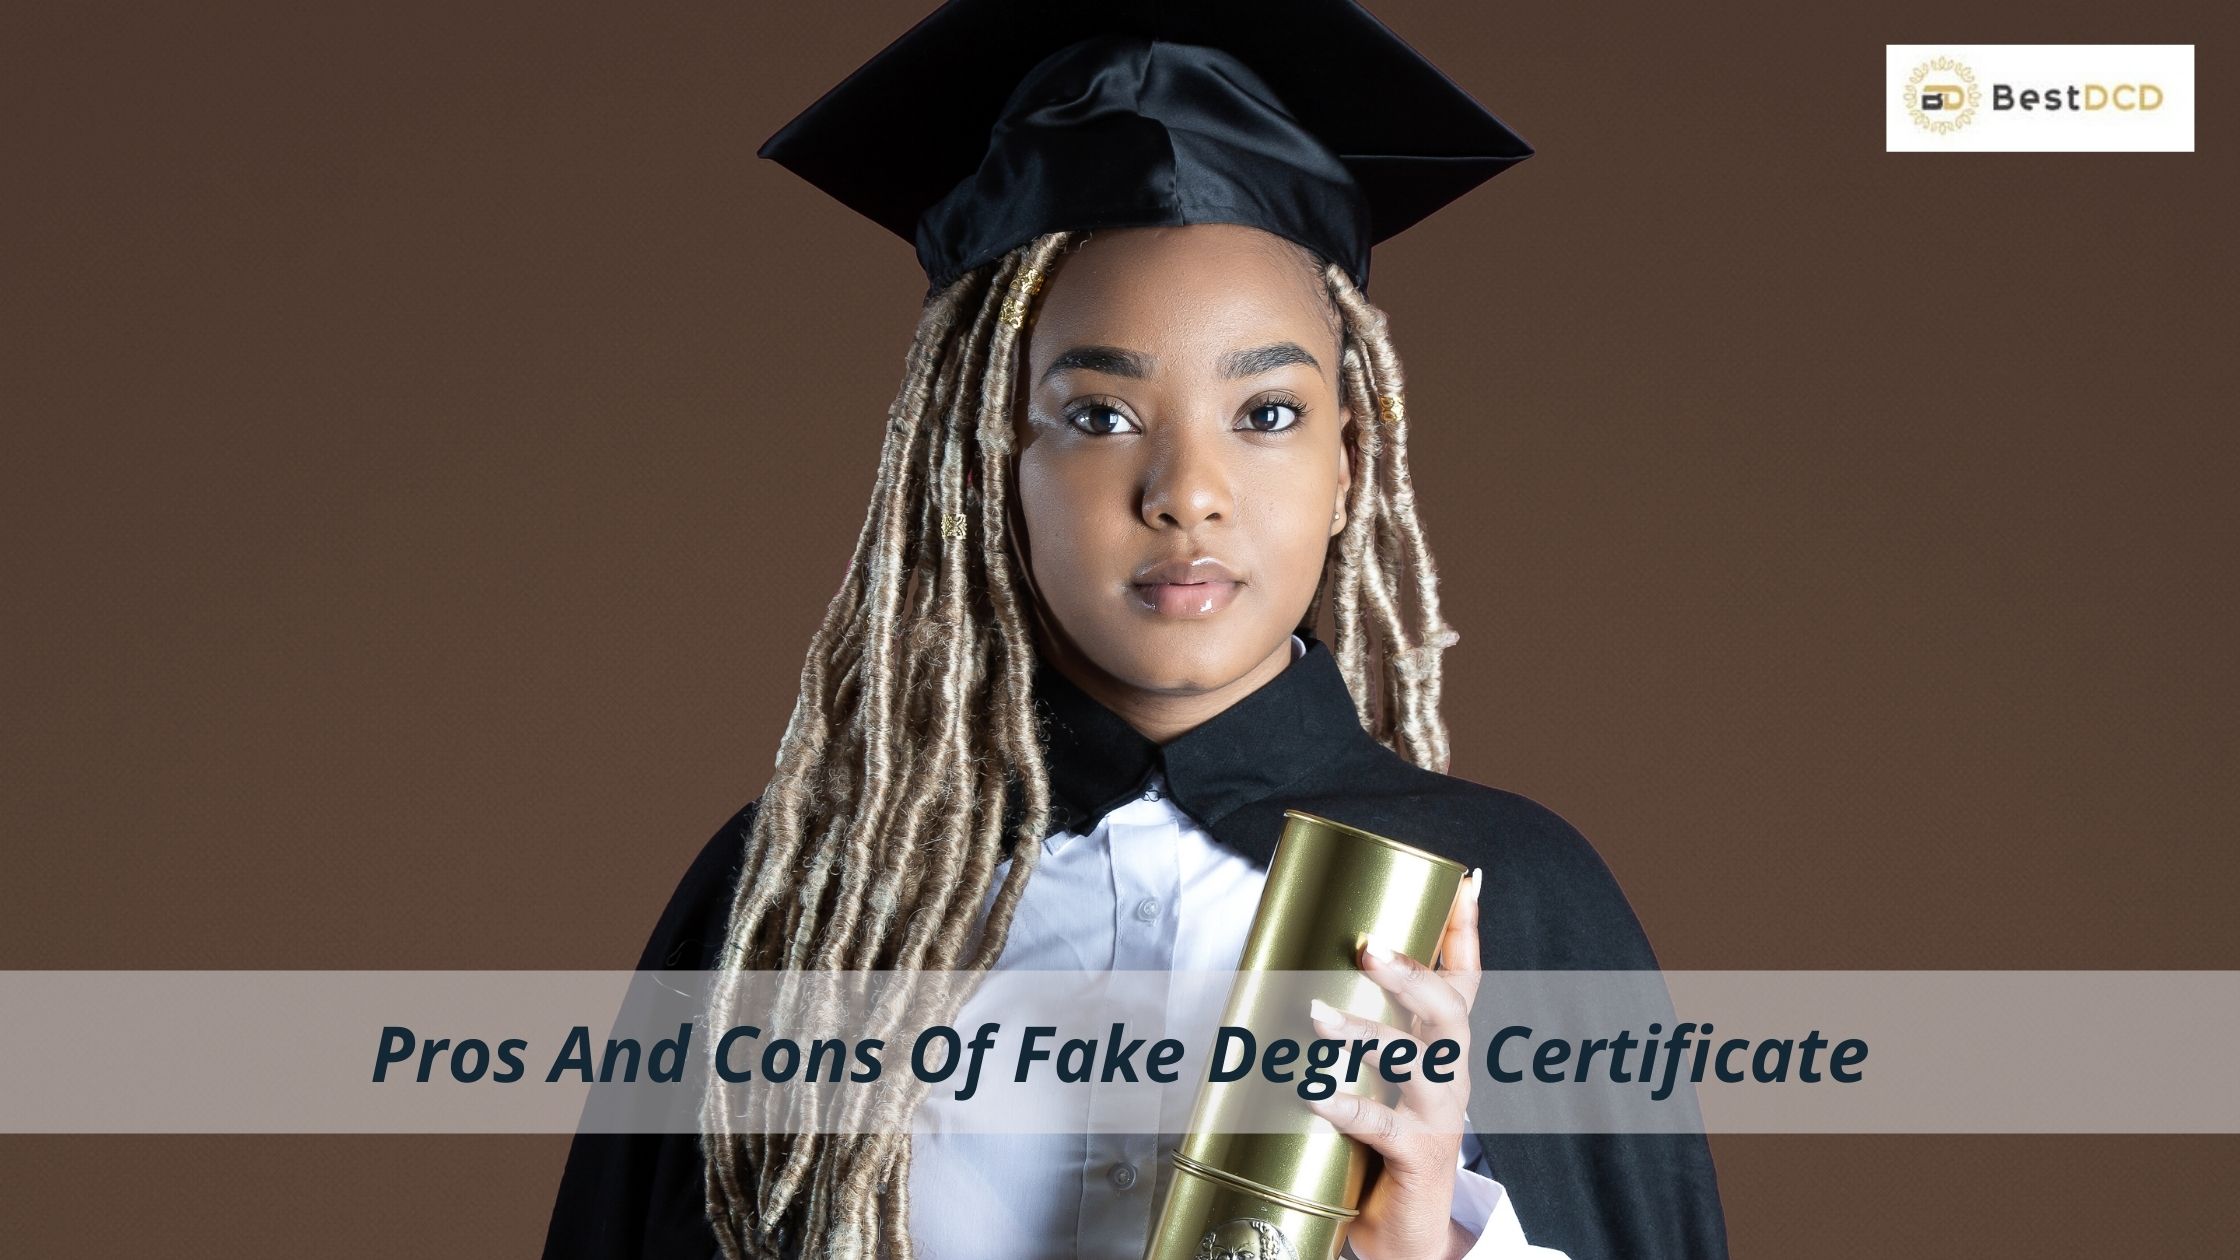 Pros And Cons Of Fake Degree Certificate